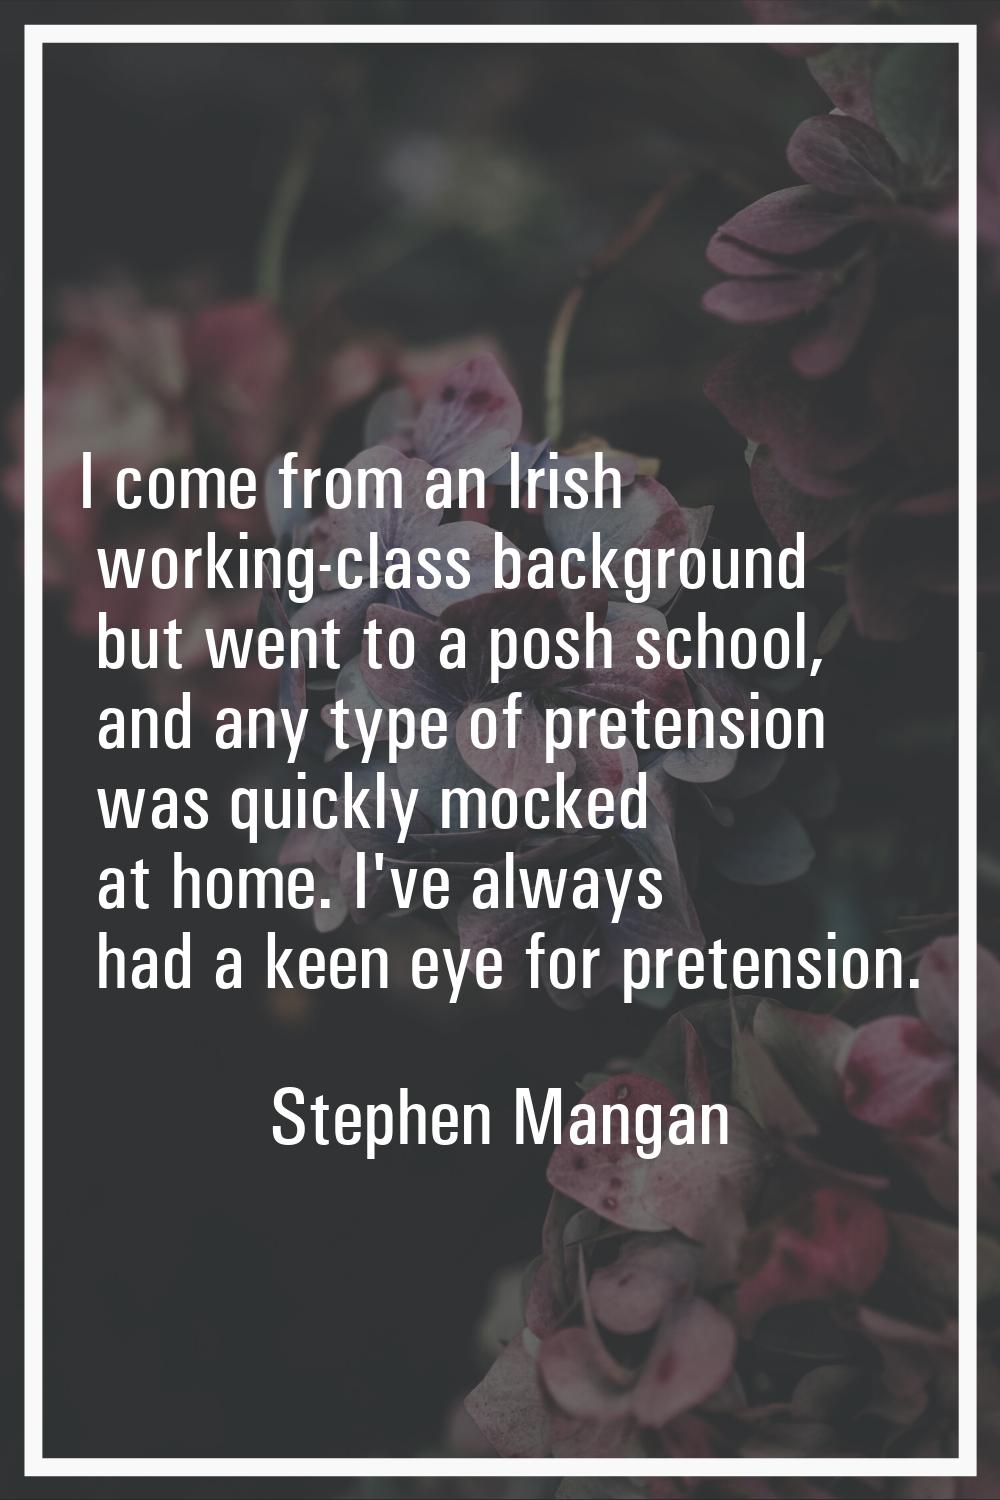 I come from an Irish working-class background but went to a posh school, and any type of pretension